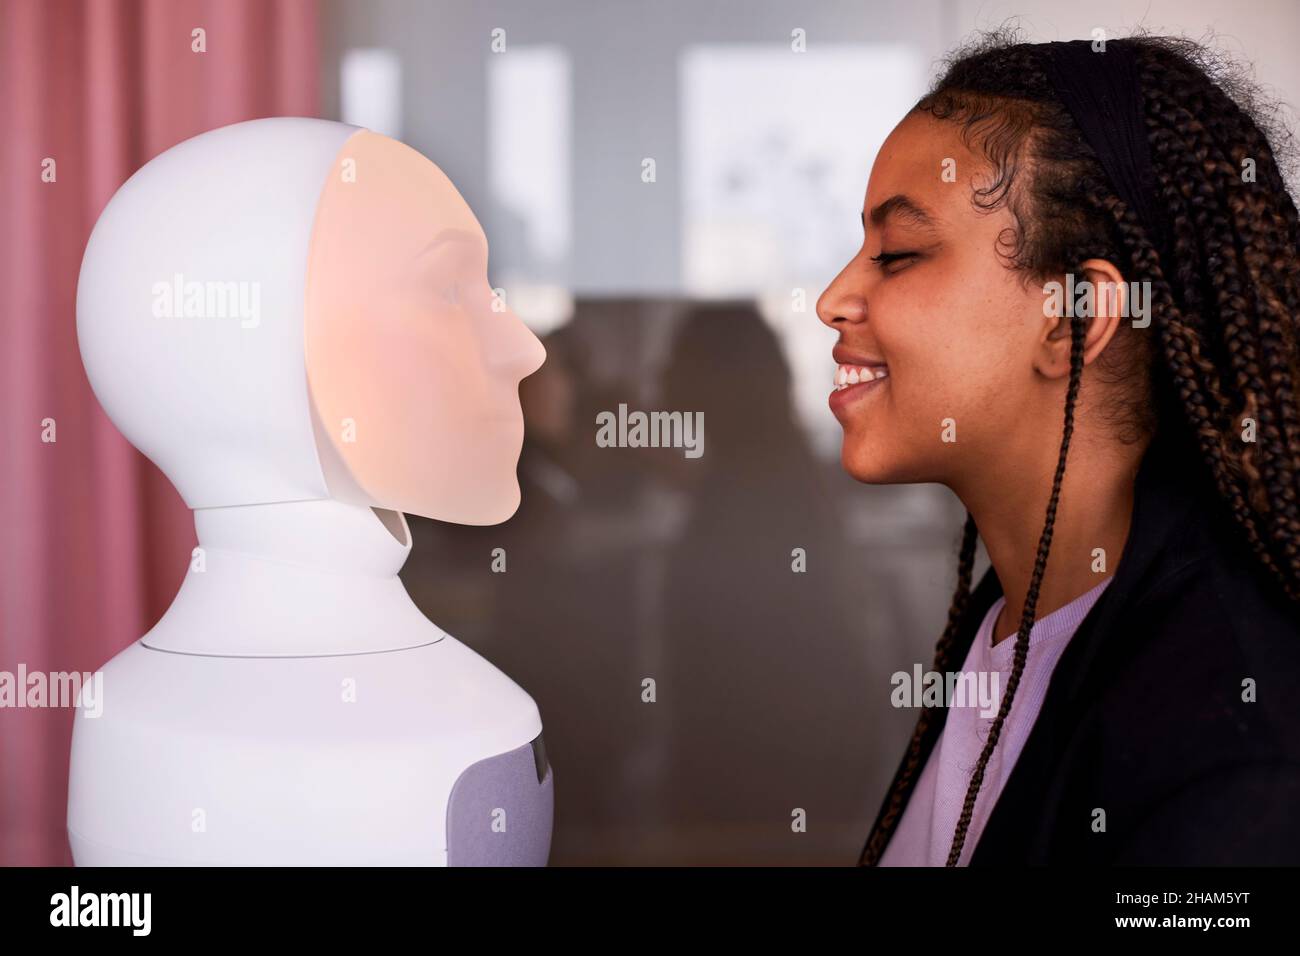 Young woman looking at robot voice assistant Stock Photo